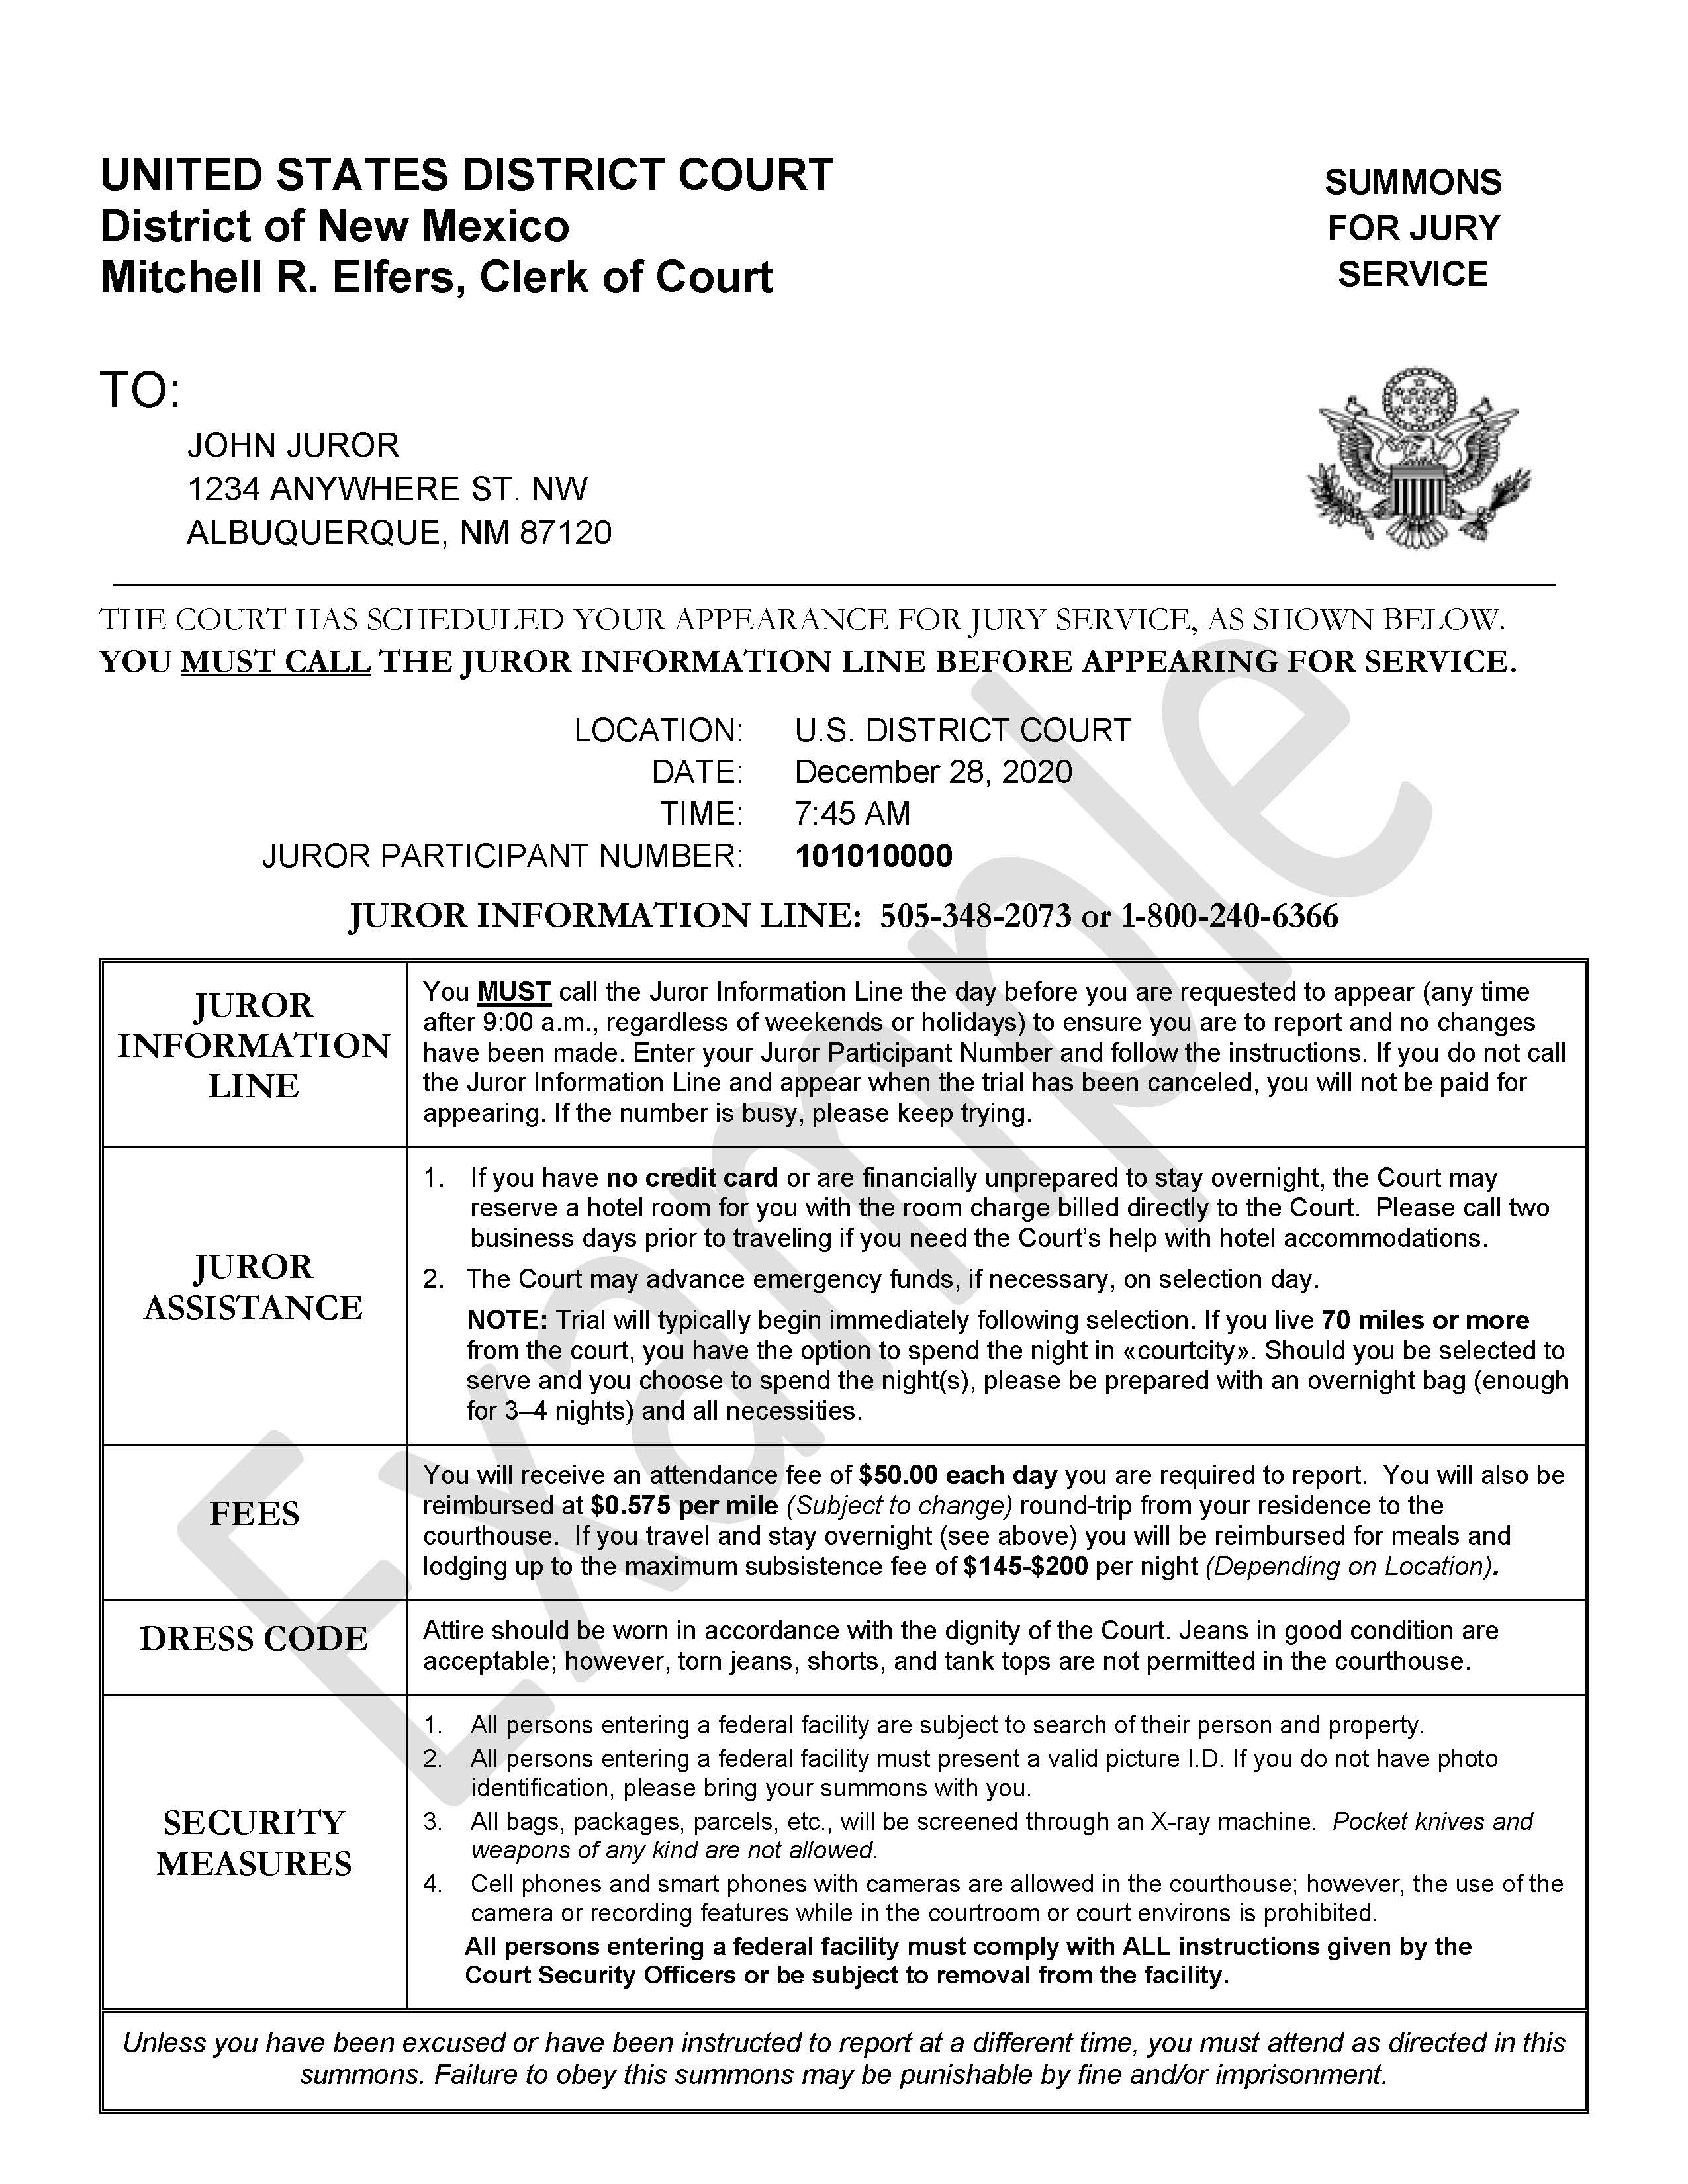 prose Using a computer Falsehood Summons for Jury Service Information | District of New Mexico | United  States District Court